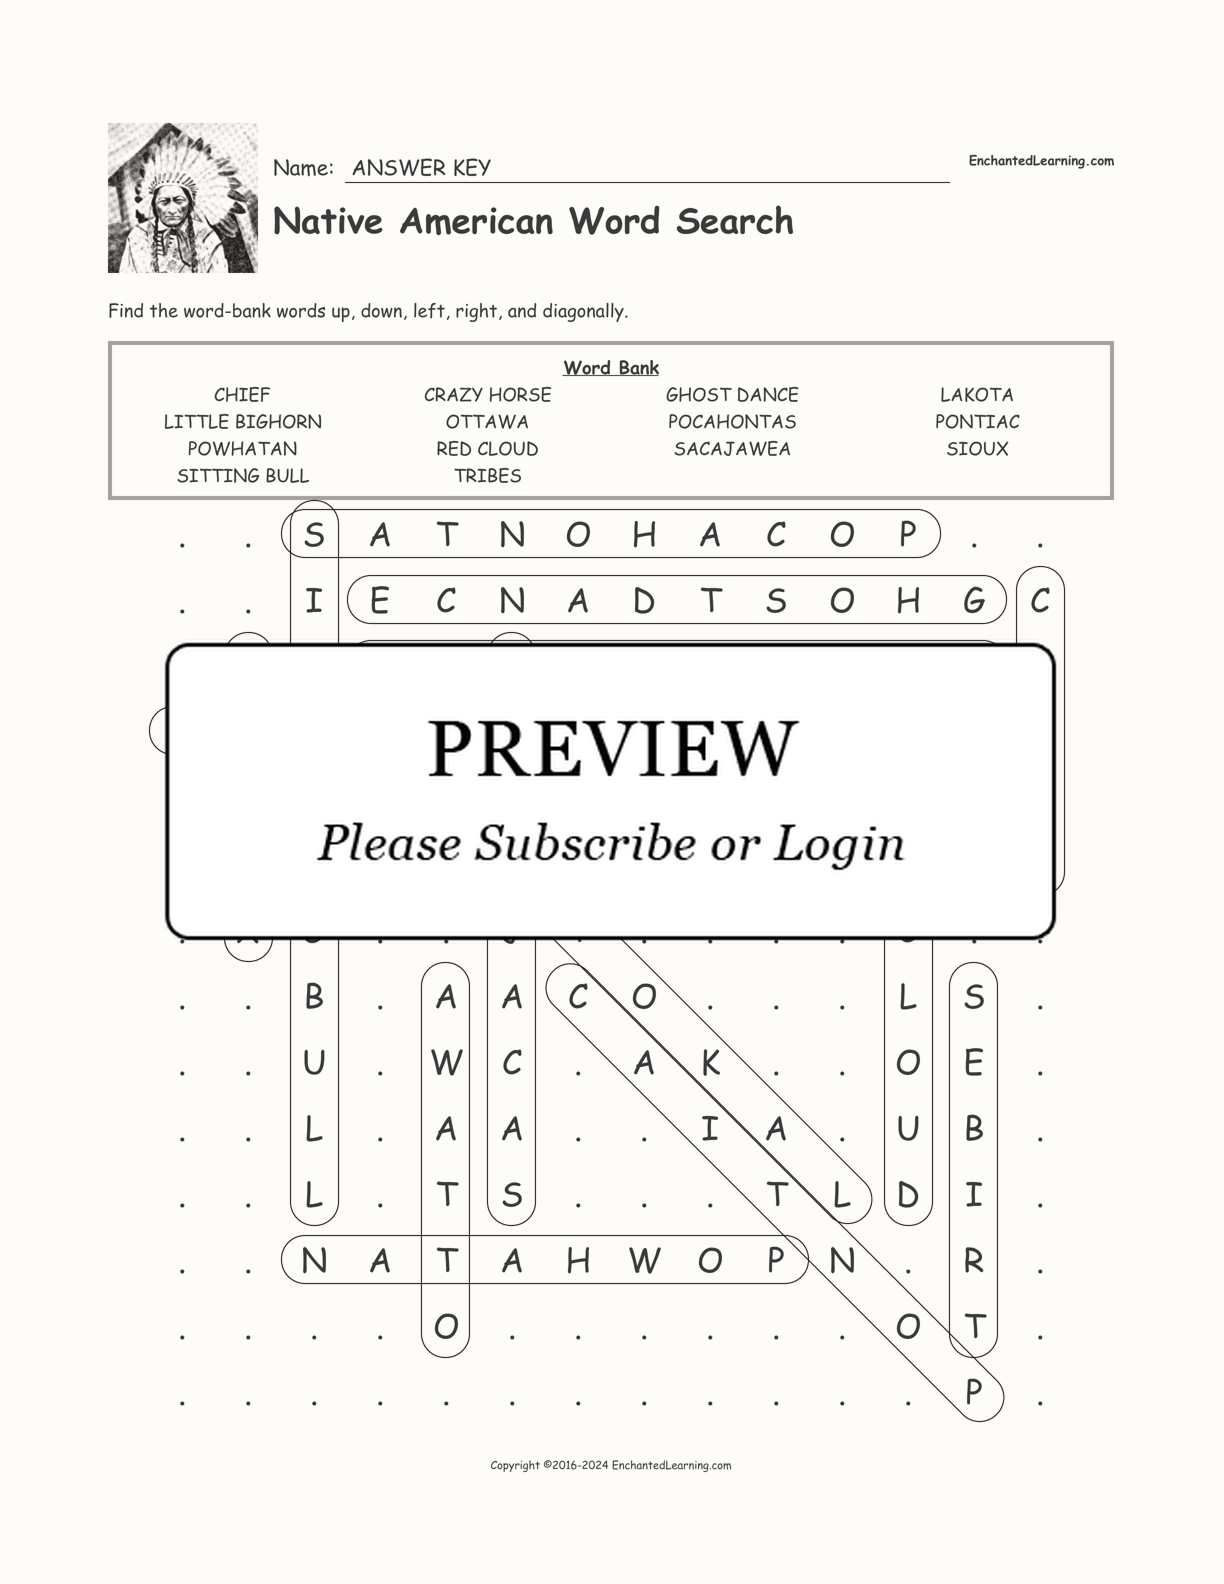 Native American Word Search interactive worksheet page 2